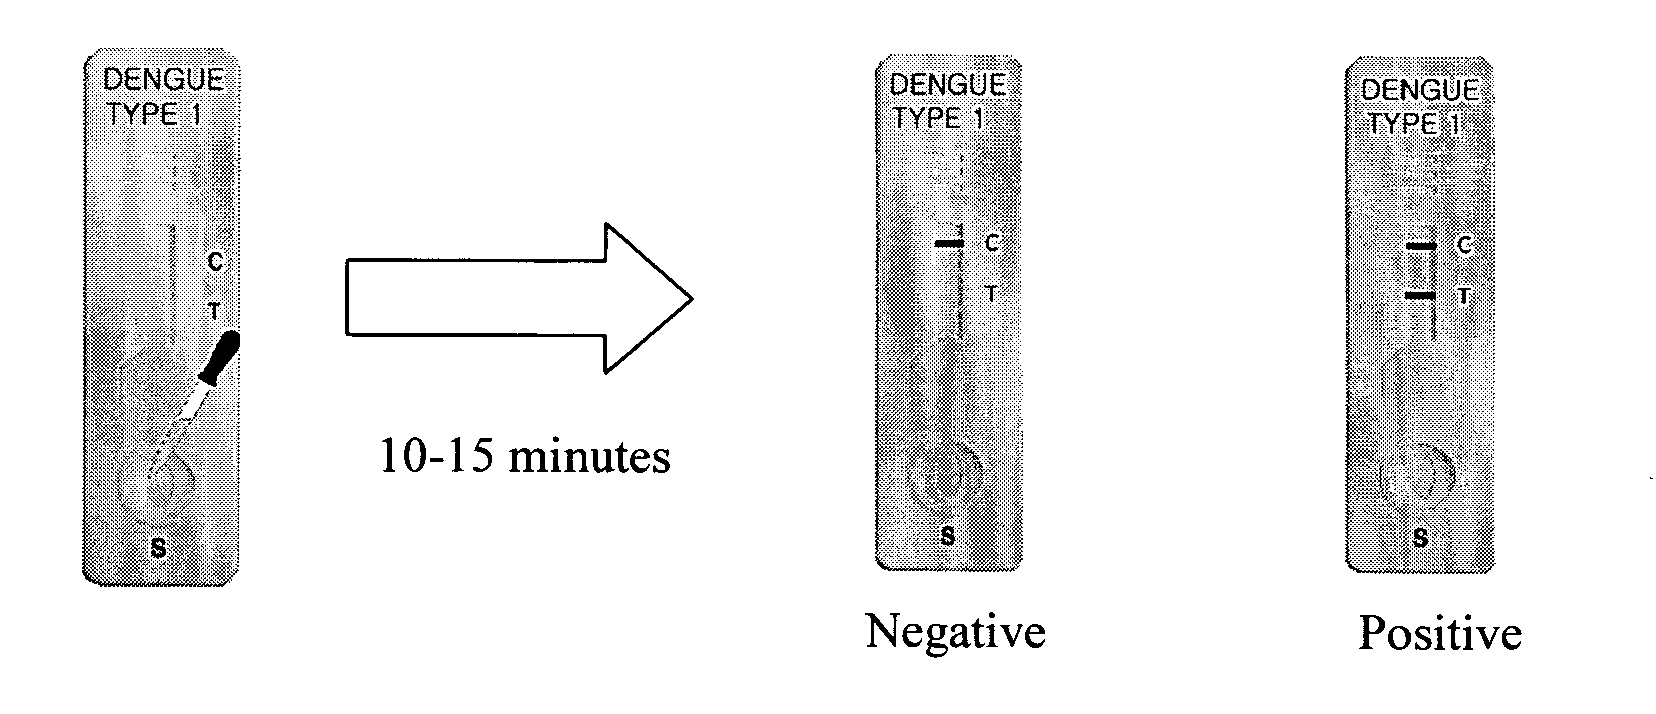 Nucleic acid detection system